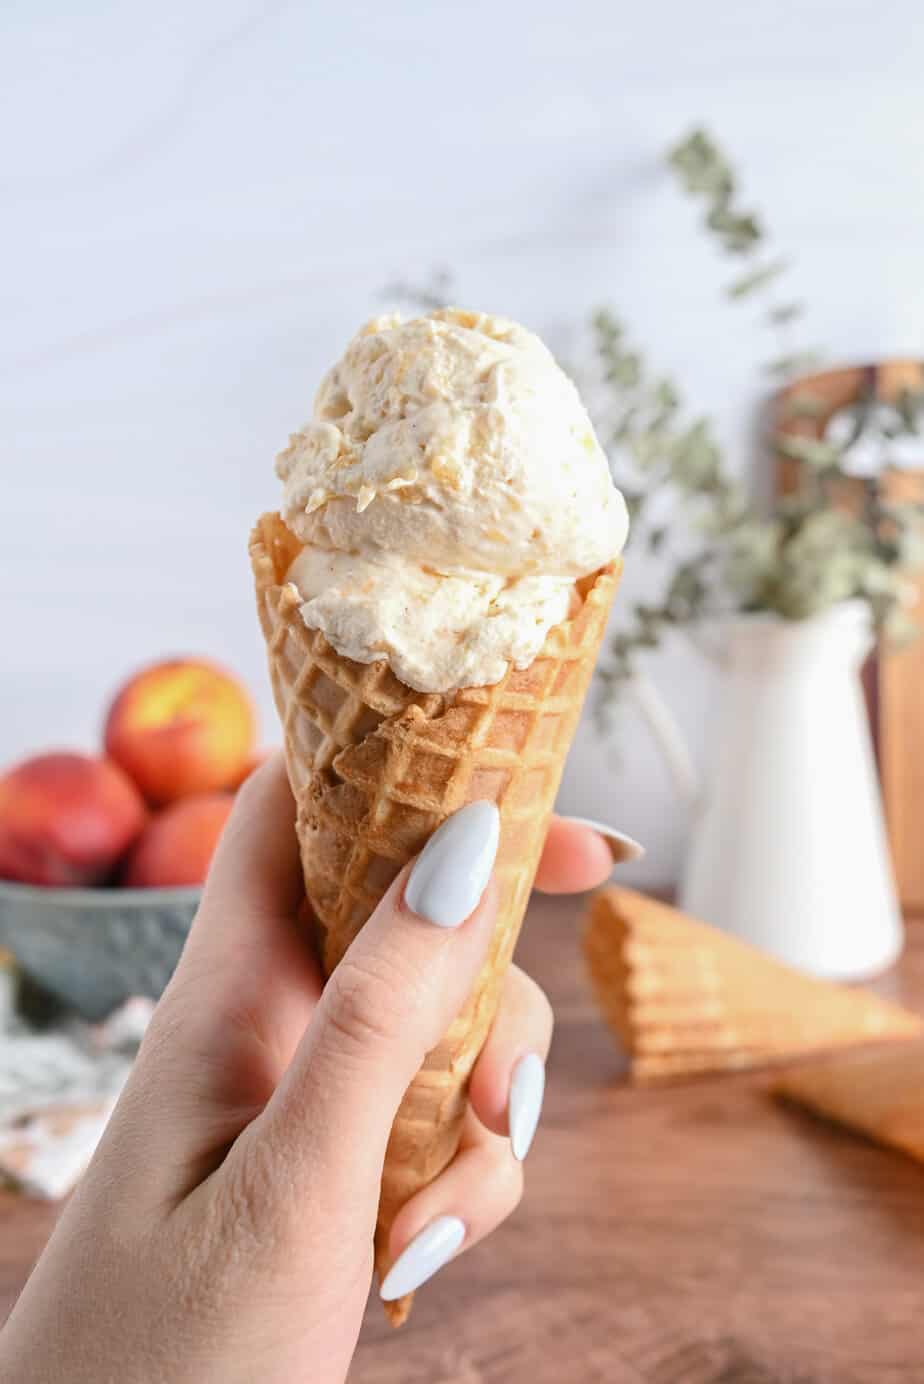 Hand holding a waffle cone with a scoop of peach ice cream in it.